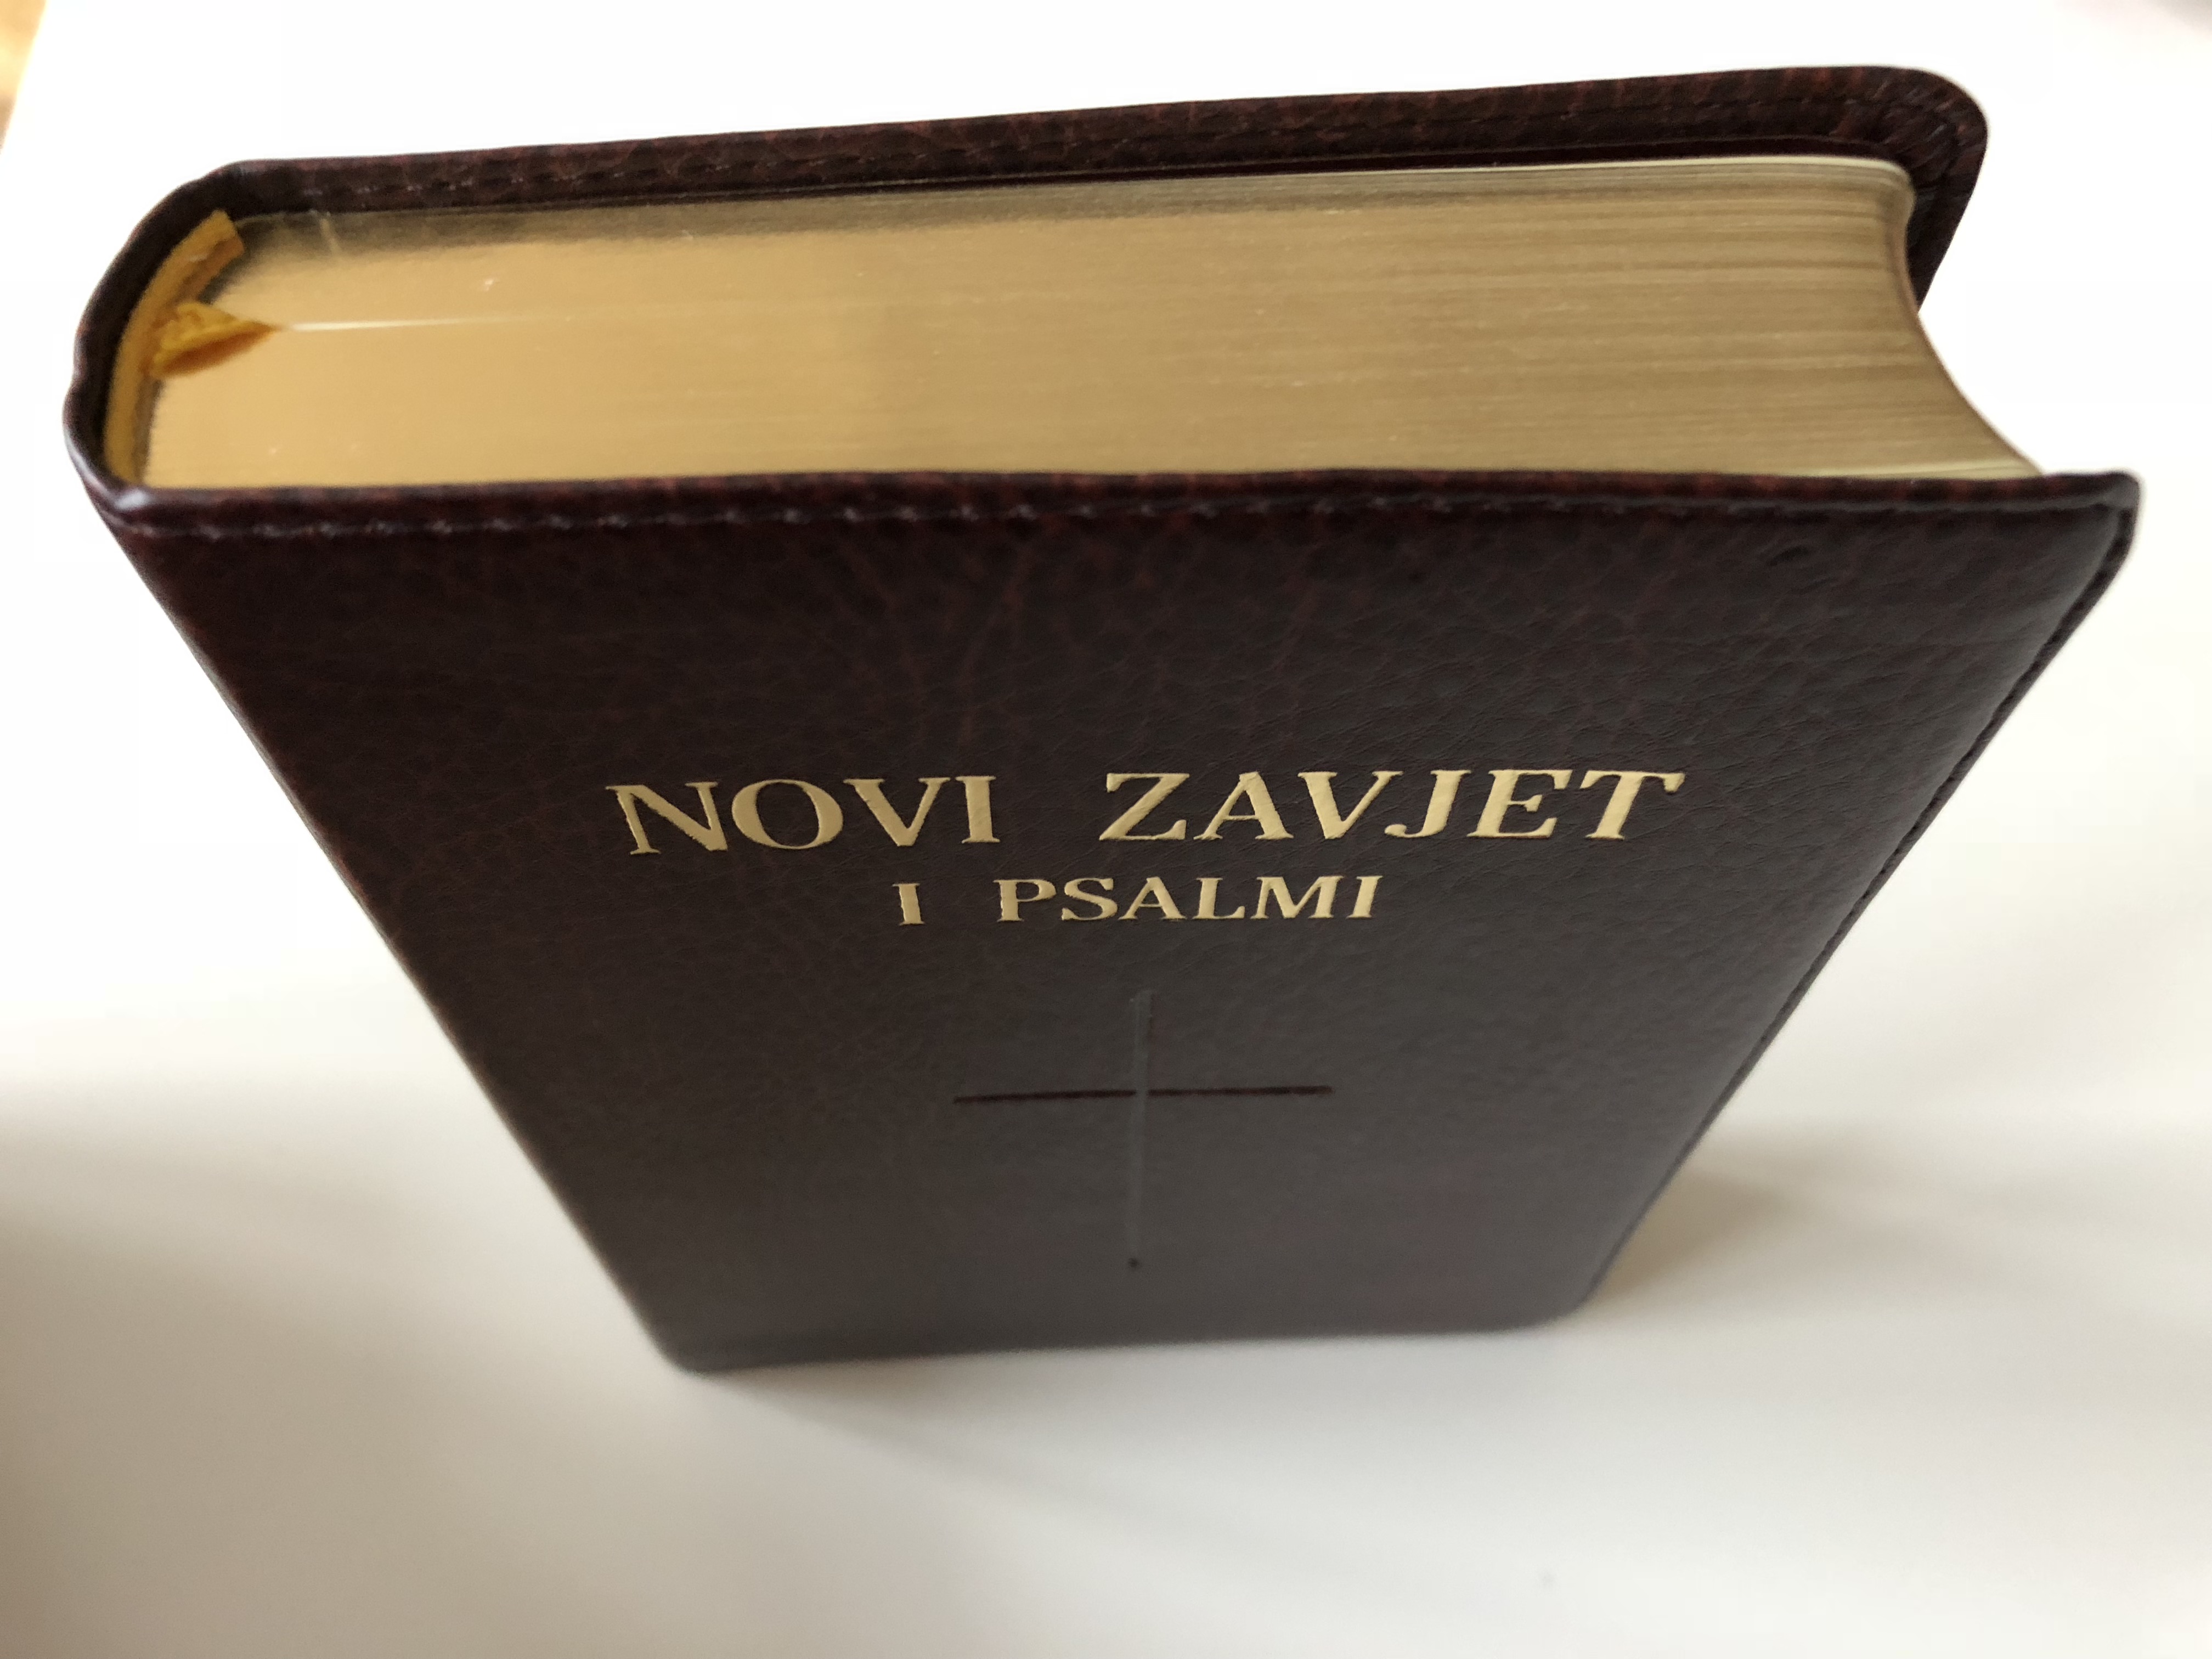 novi-zavjet-i-psalmi-the-new-testament-and-the-book-of-psalms-in-croatian-language-brown-leather-bound-golden-edges-hb-3-.jpg